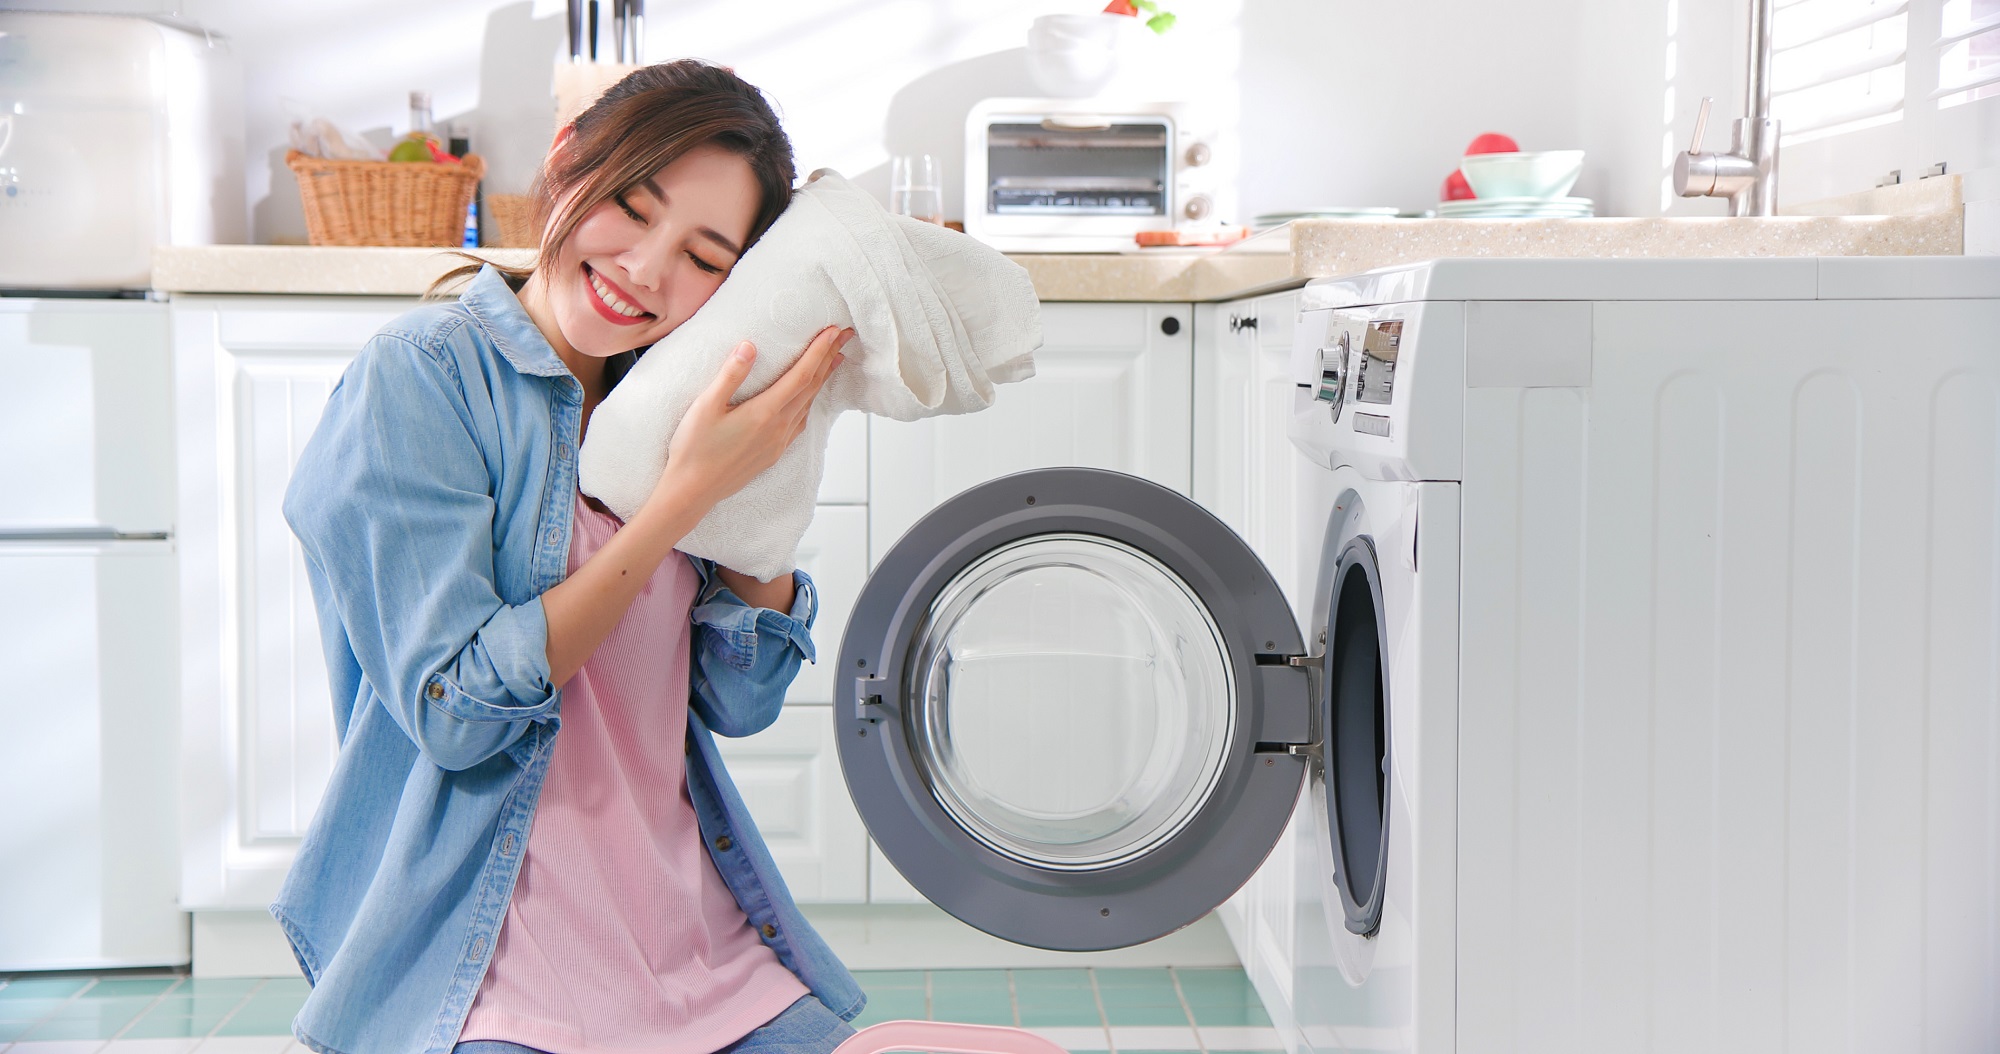 Putrid Clothes? Don't Panic - Here's What to do about Smelly Washing Machines